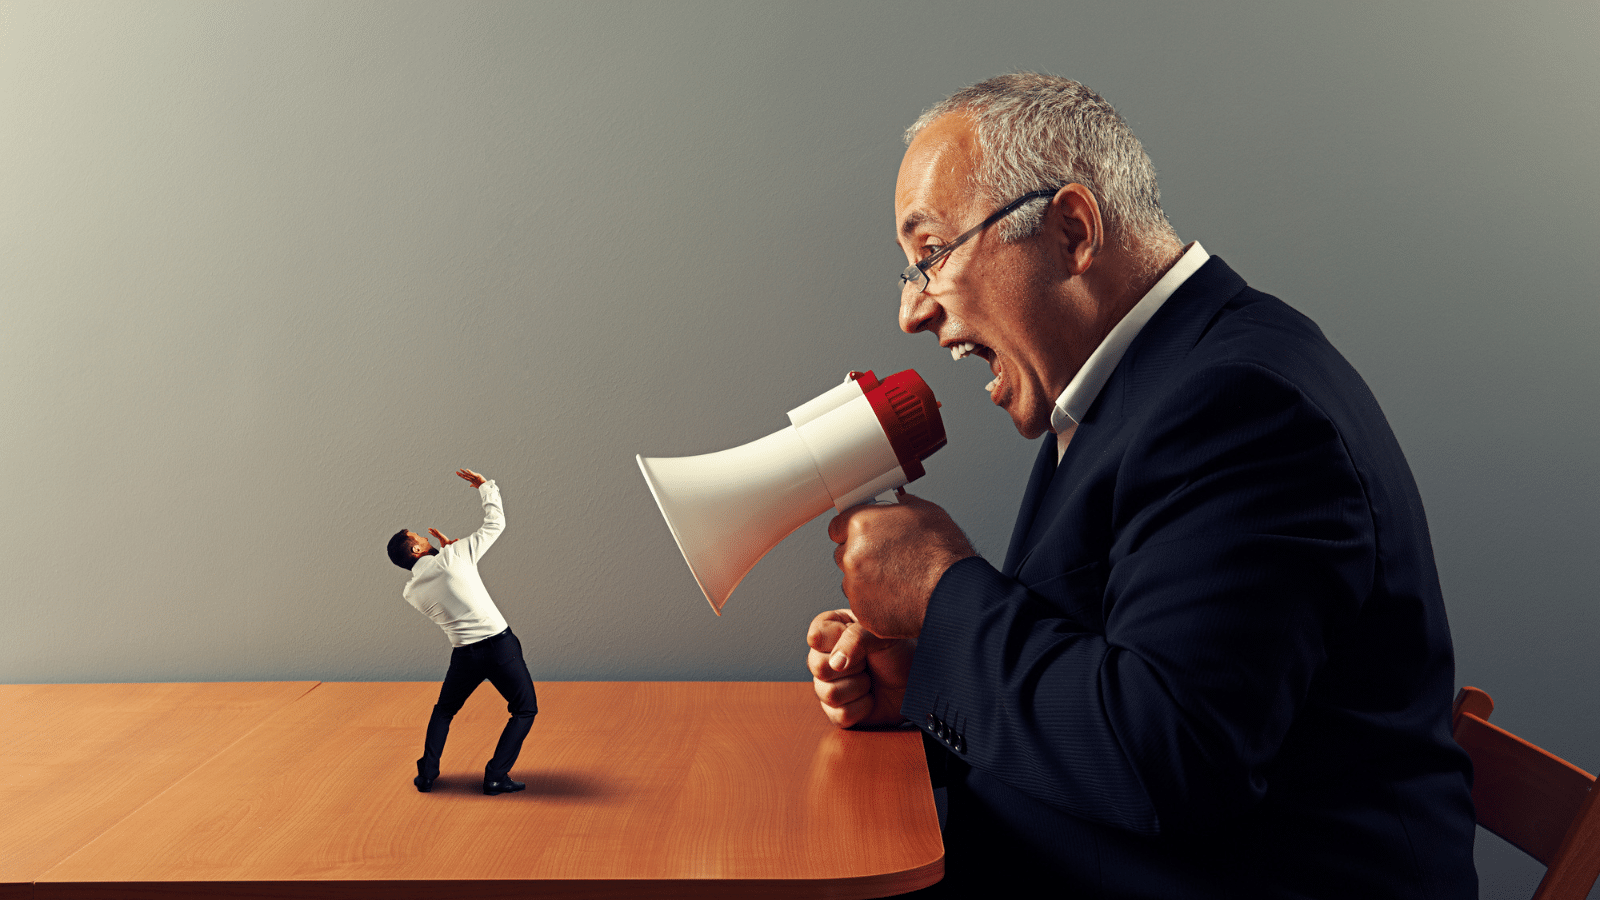 boss screaming at miniature employee with megaphone